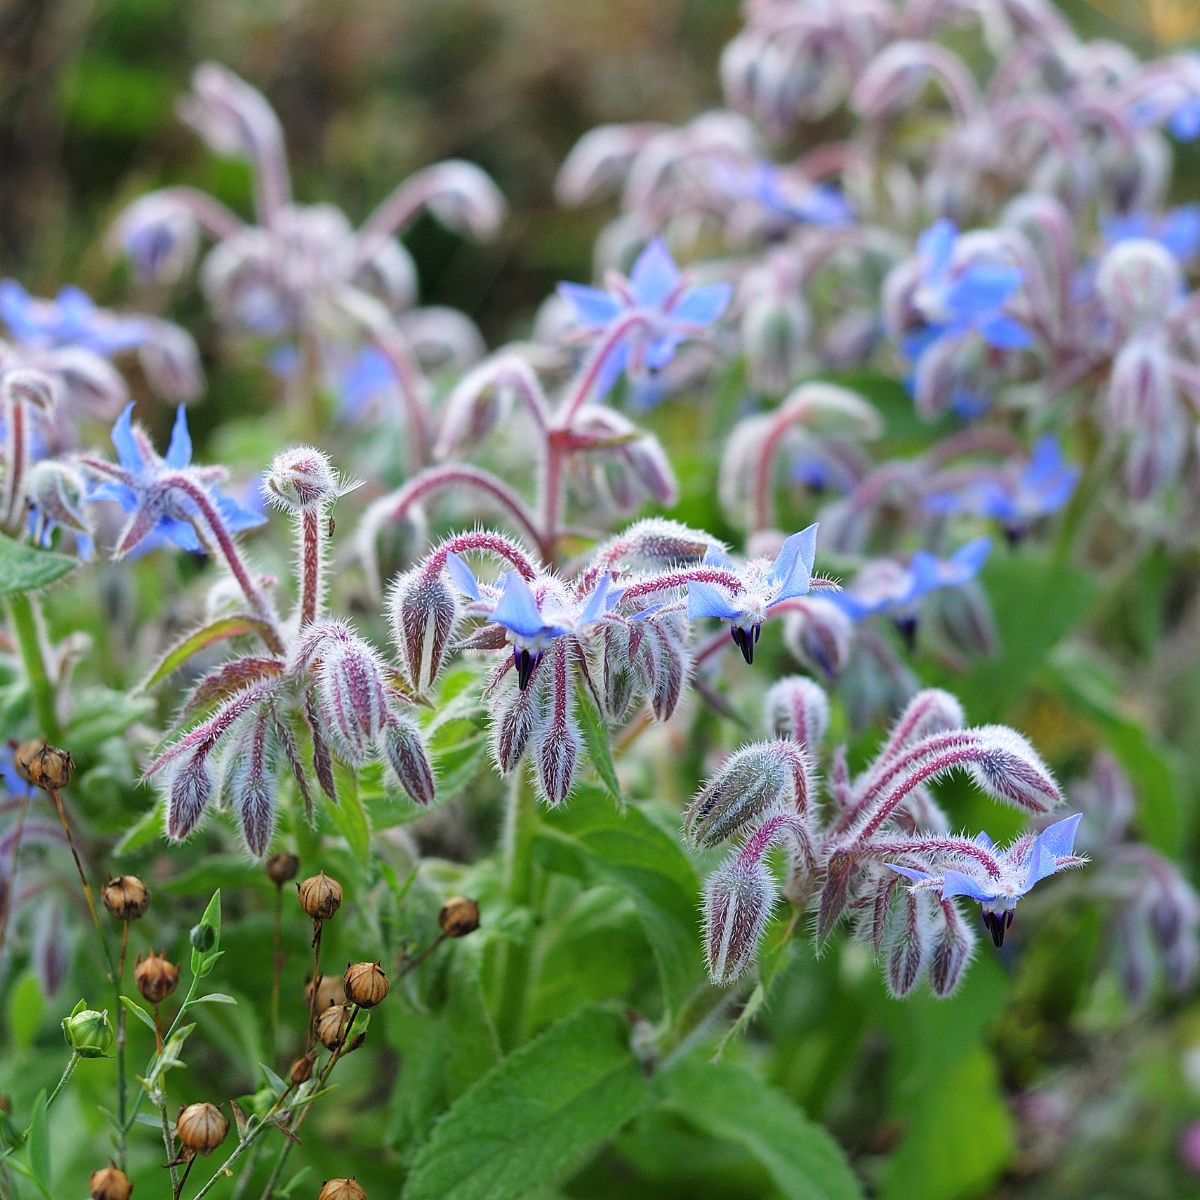 borage plant full of buds and blooms.